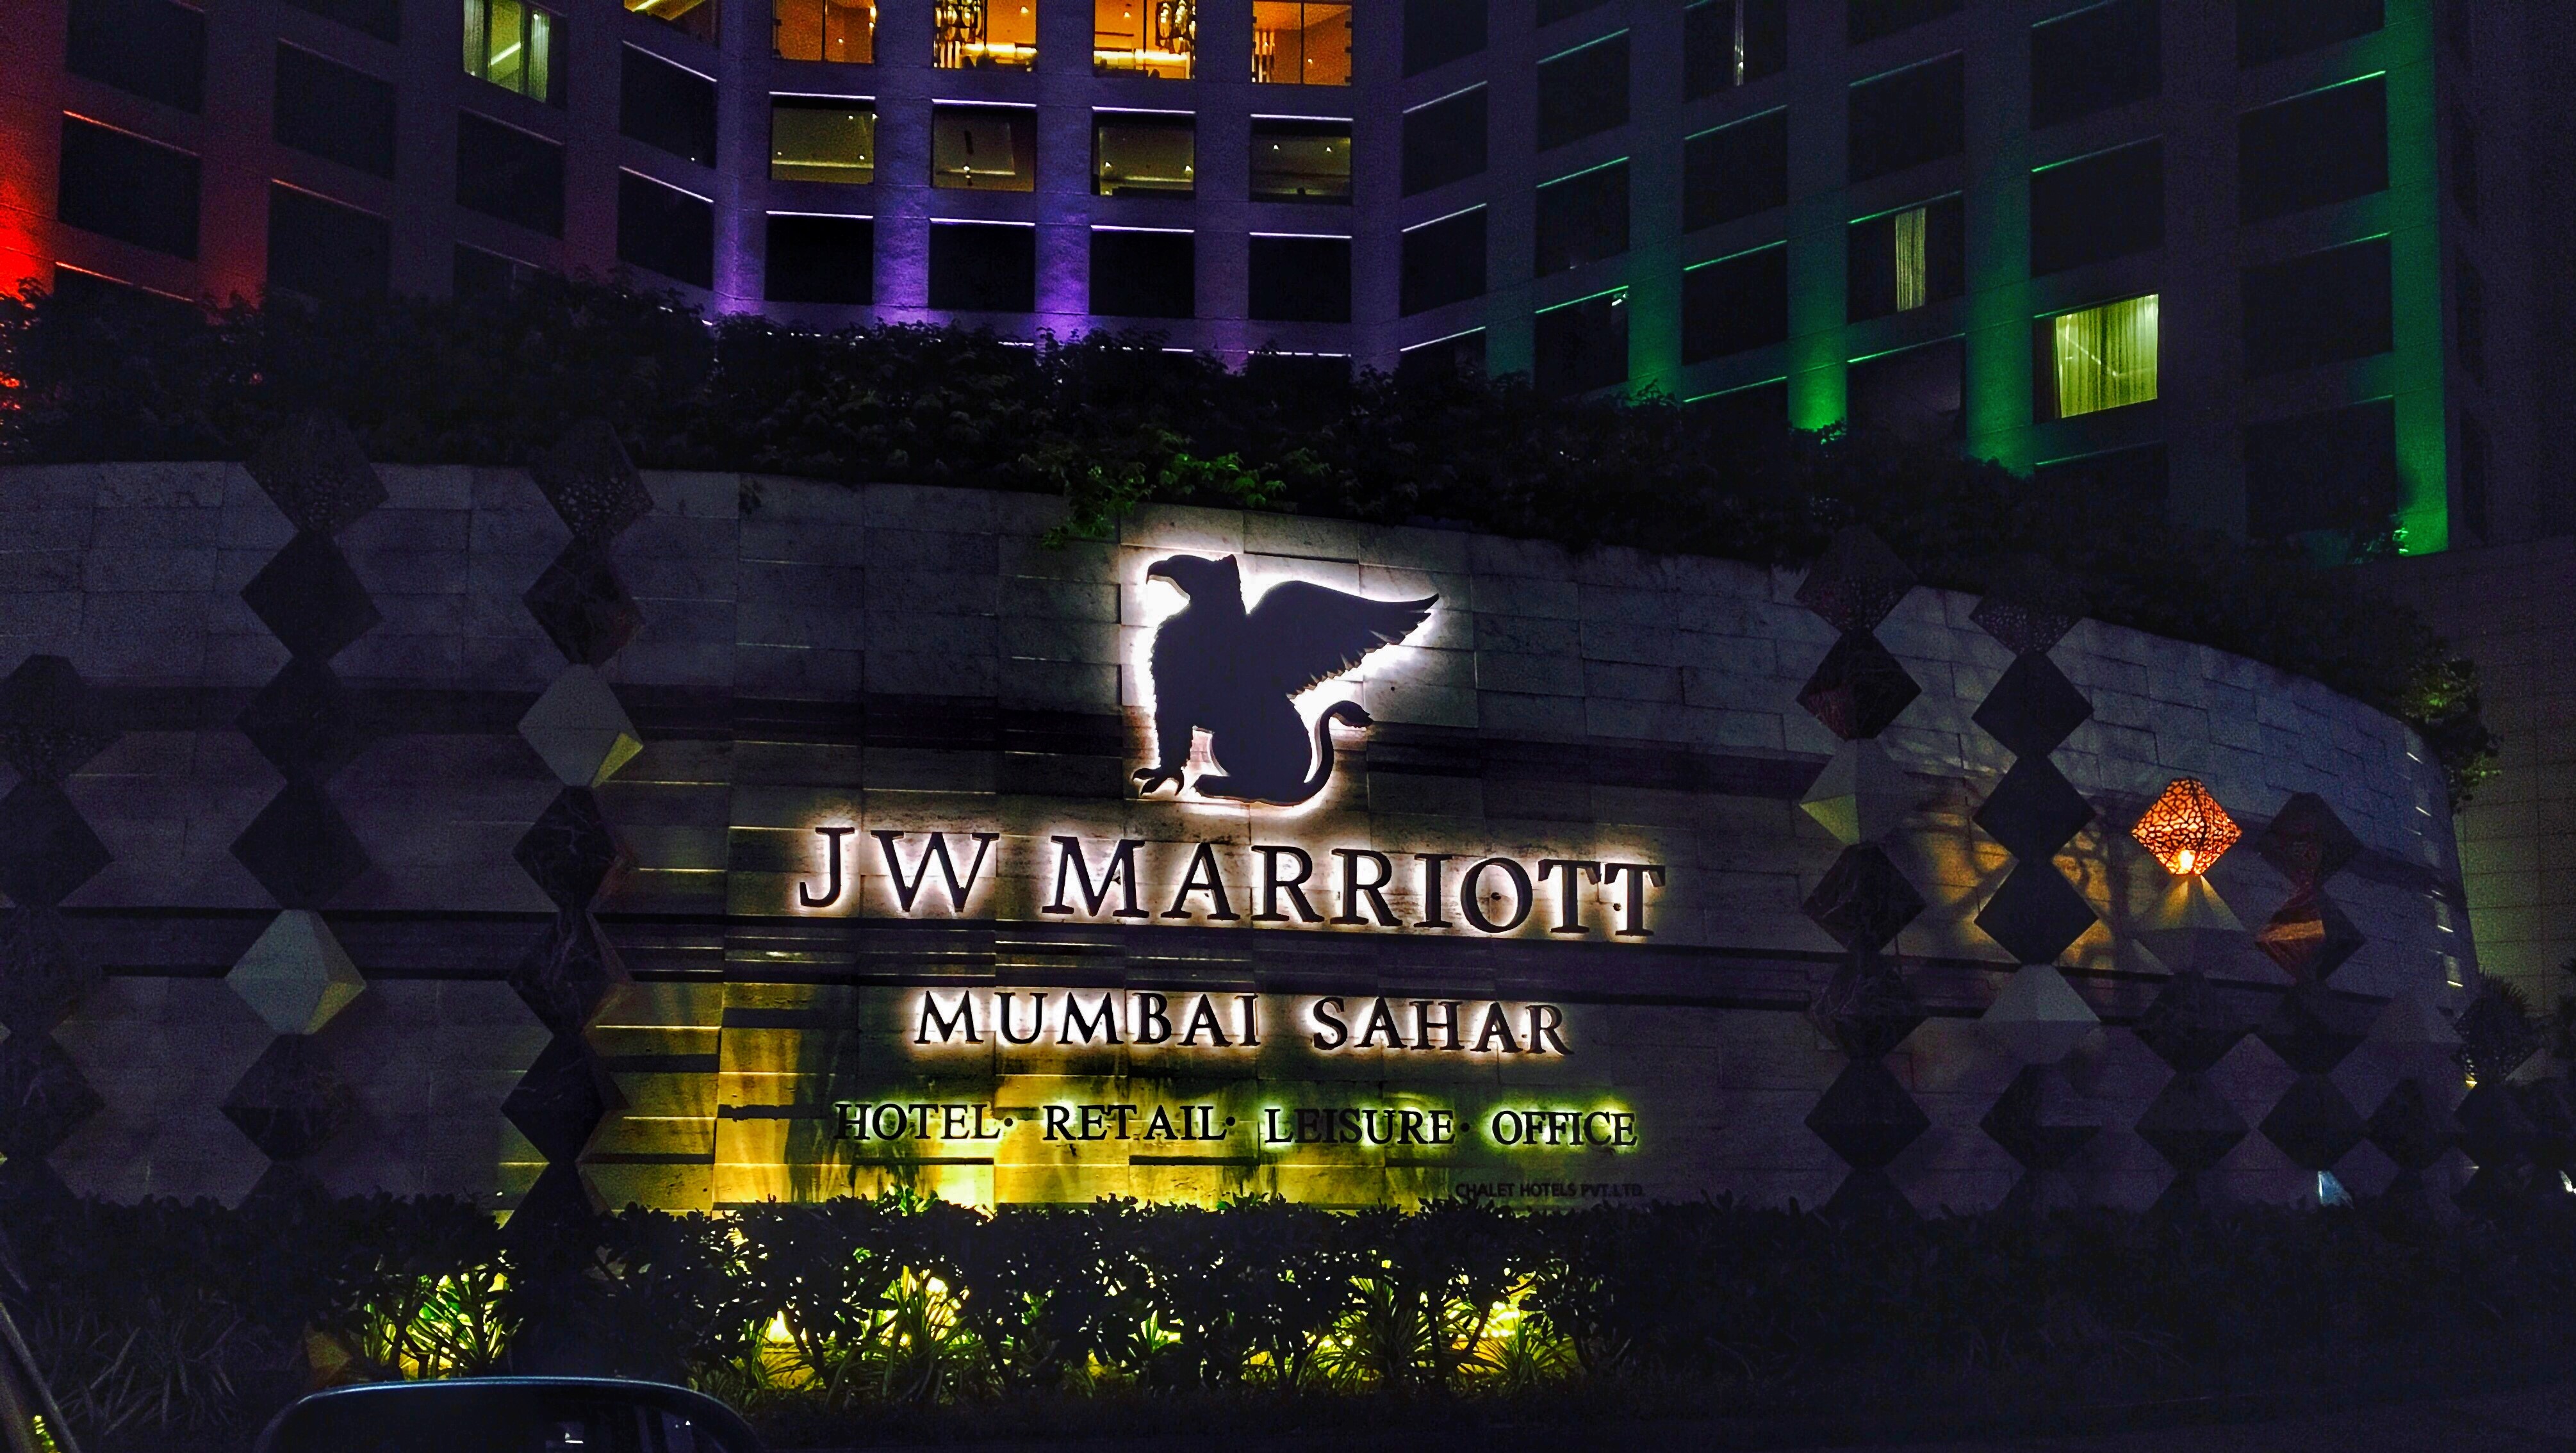 A Relaxing Staycation At JW Marriot: JW Marriot Mumbai Sahar Review